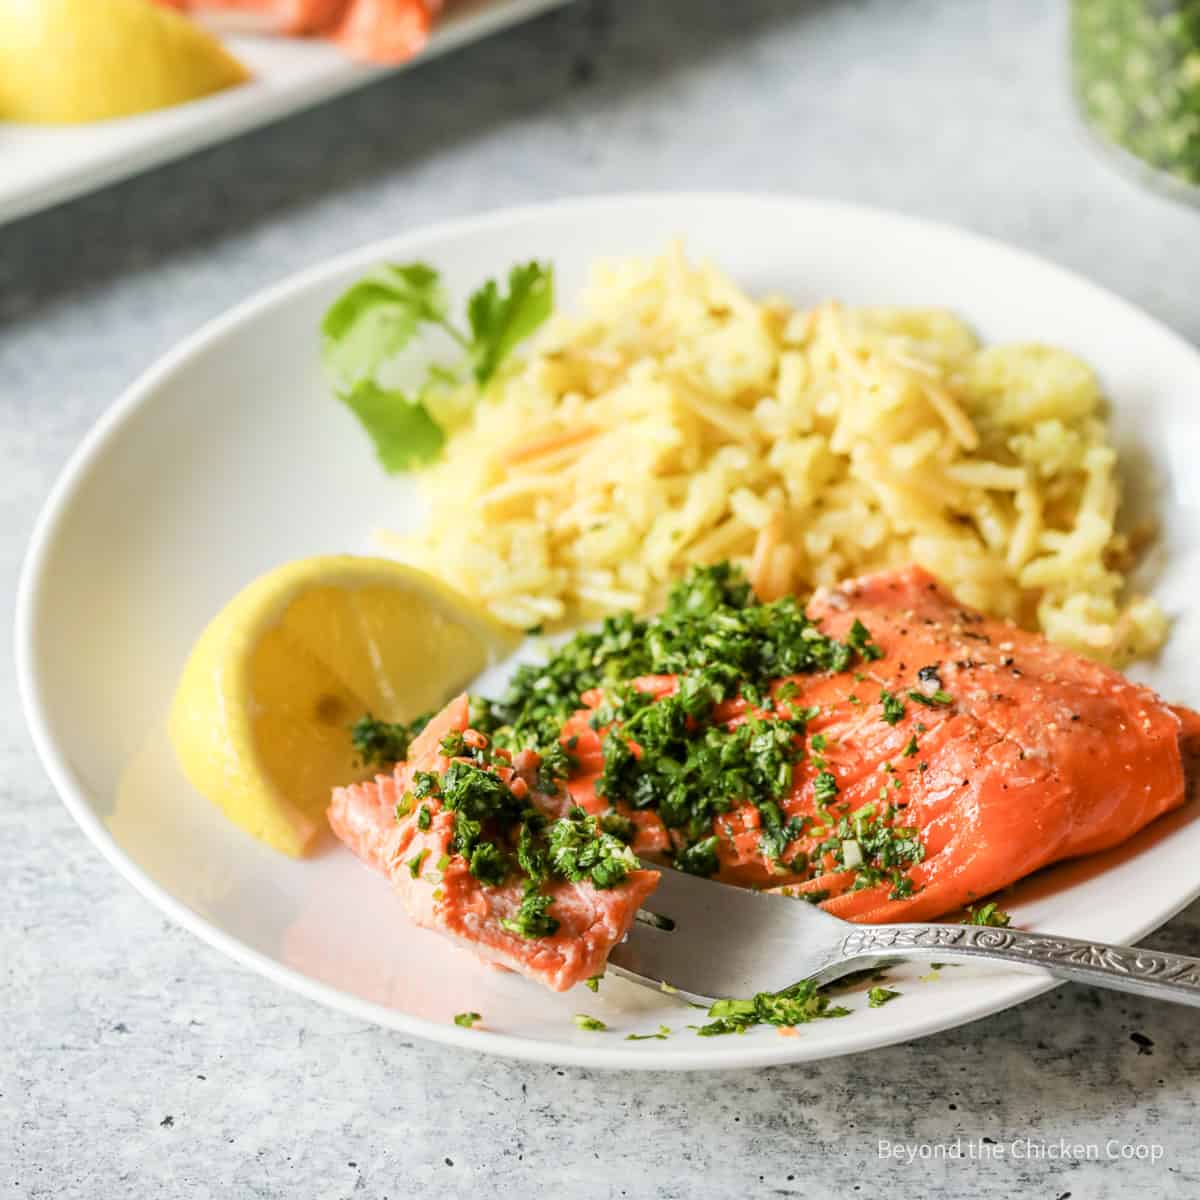 A piece of salmon topped with finely chopped parsley.